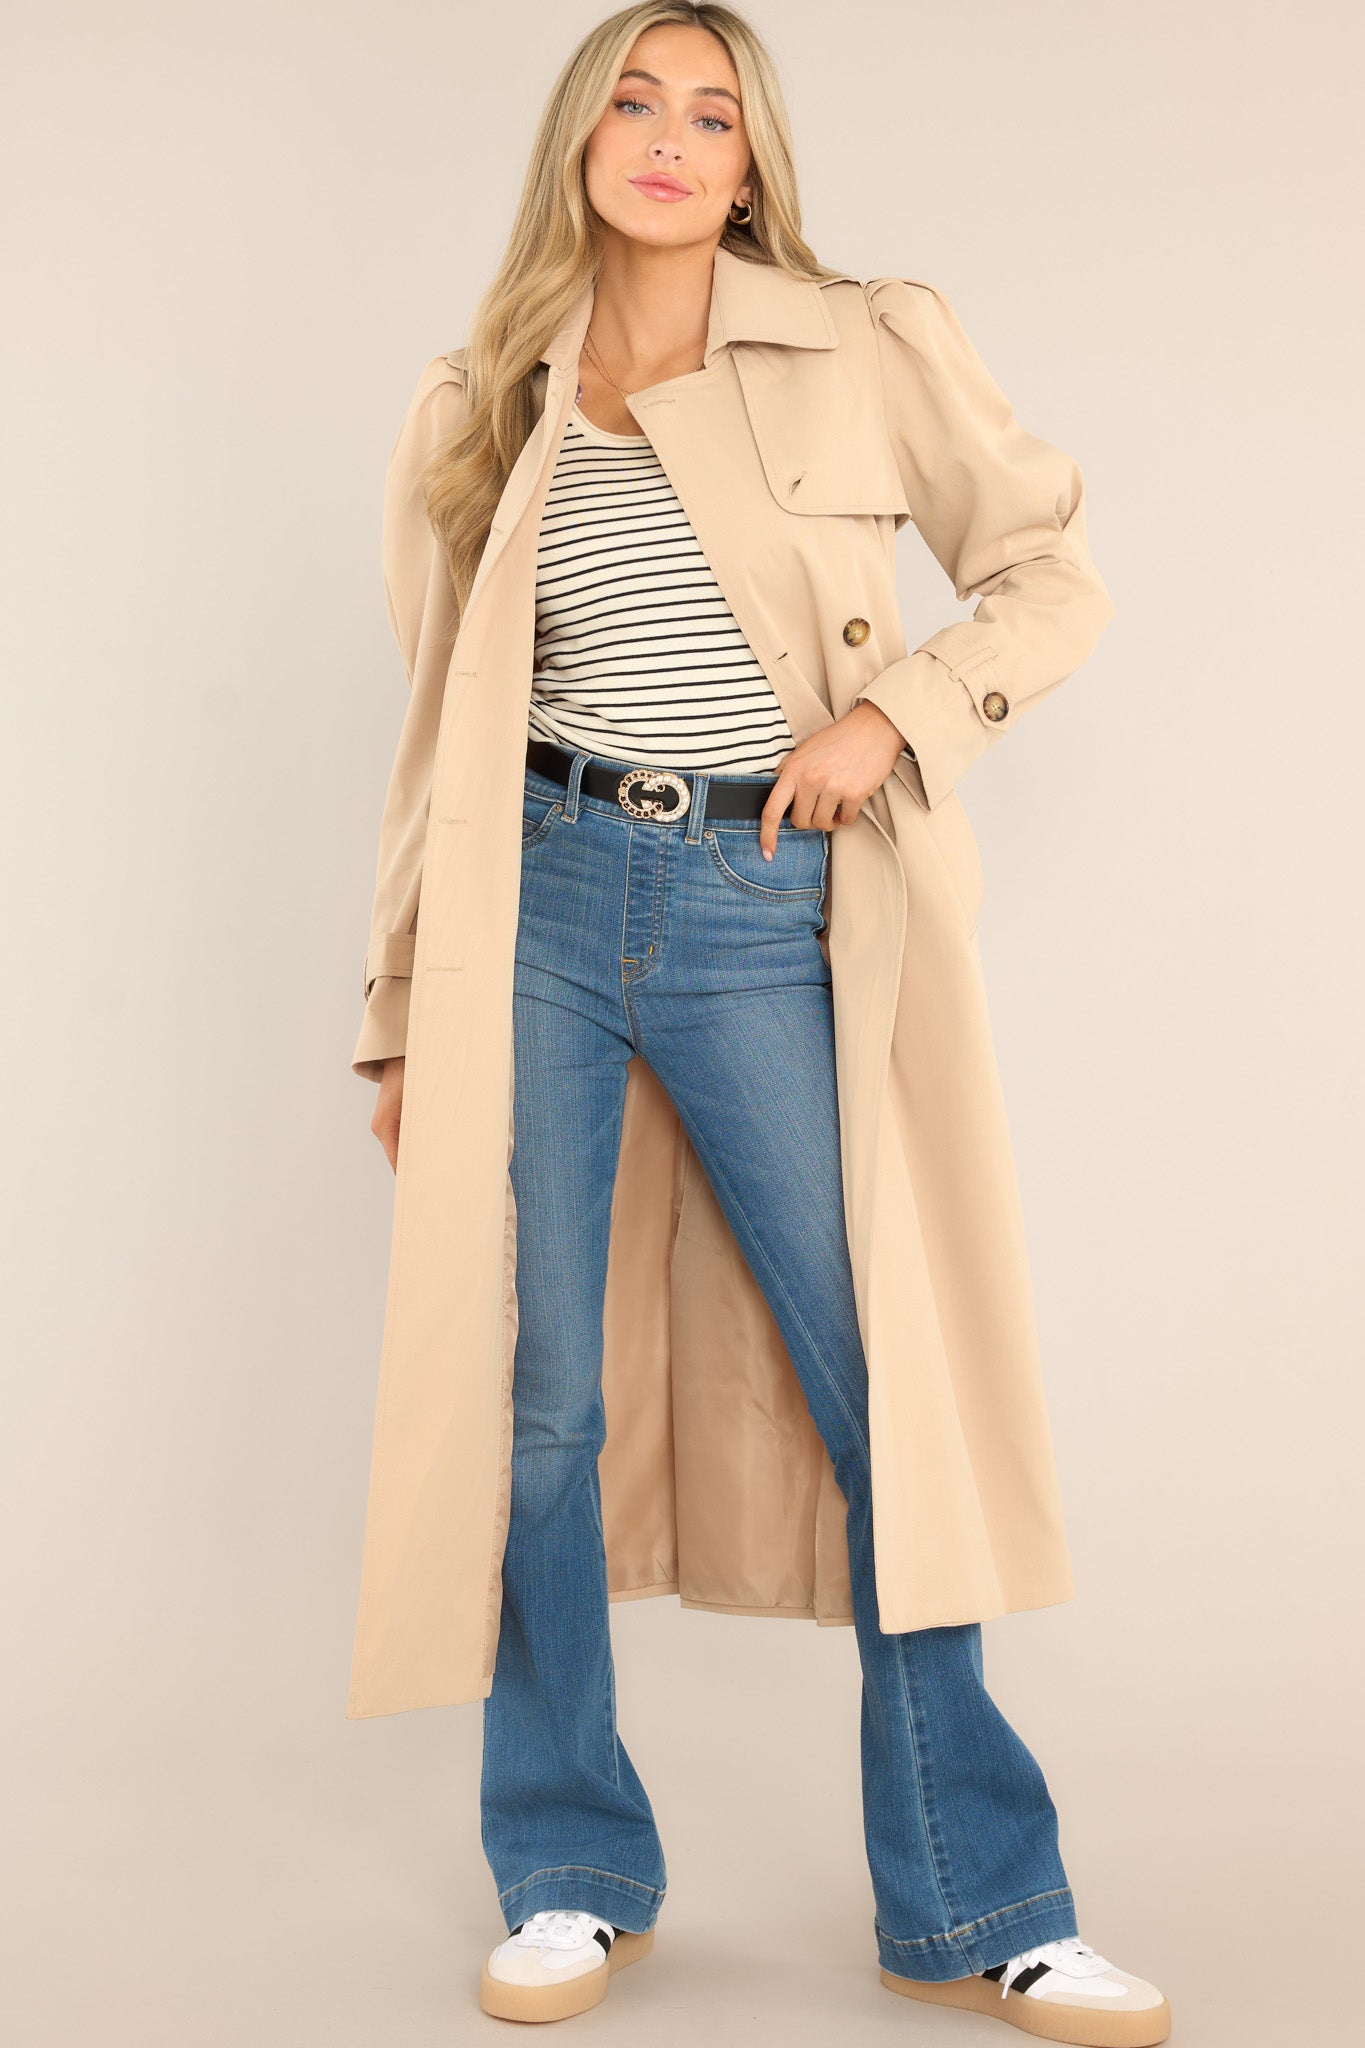 Classic Tan Belted Trench Coat - All Outerwear